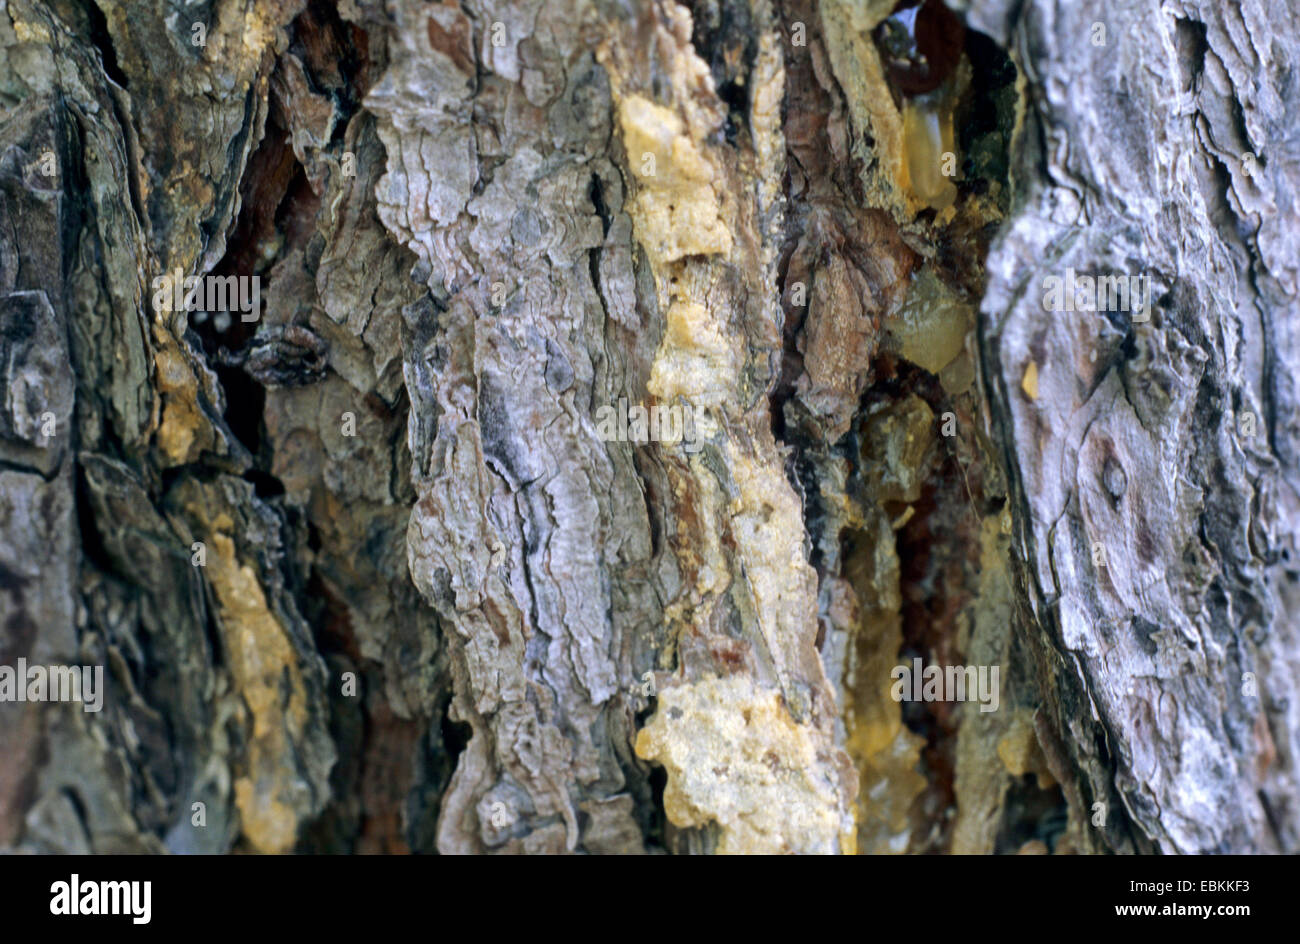 northern pine, pitch pine (Pinus rigida), leaking resin at a tree trunk Stock Photo